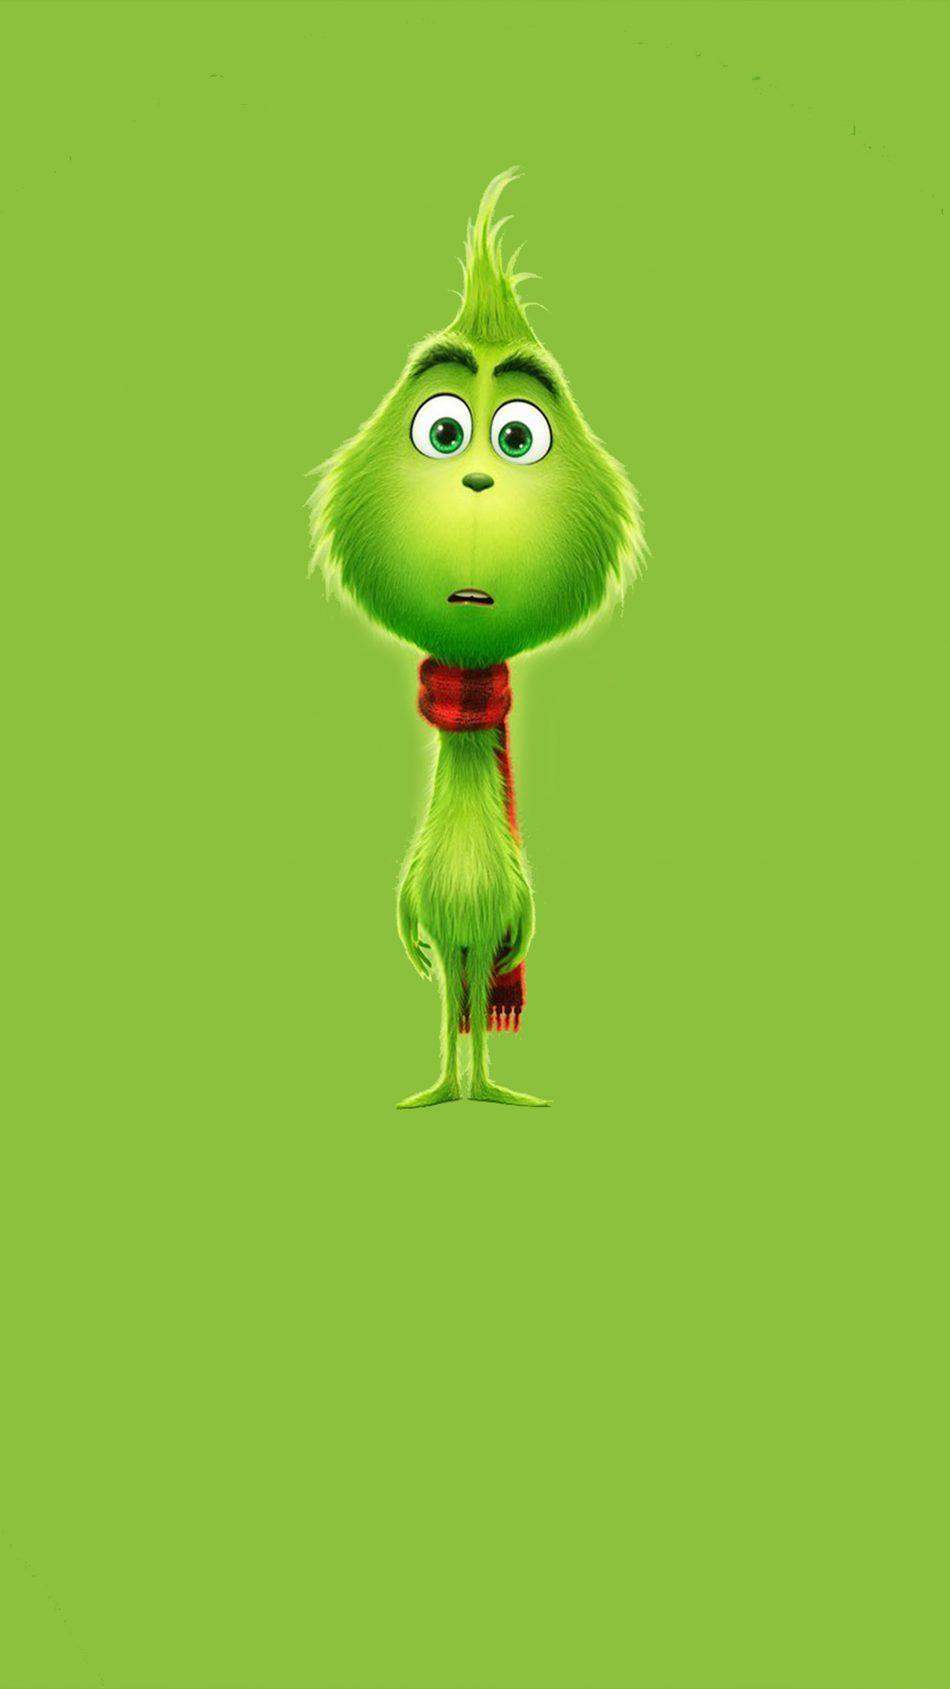 The Grinch Movie 2018. The grinch movie, Christmas wallpaper